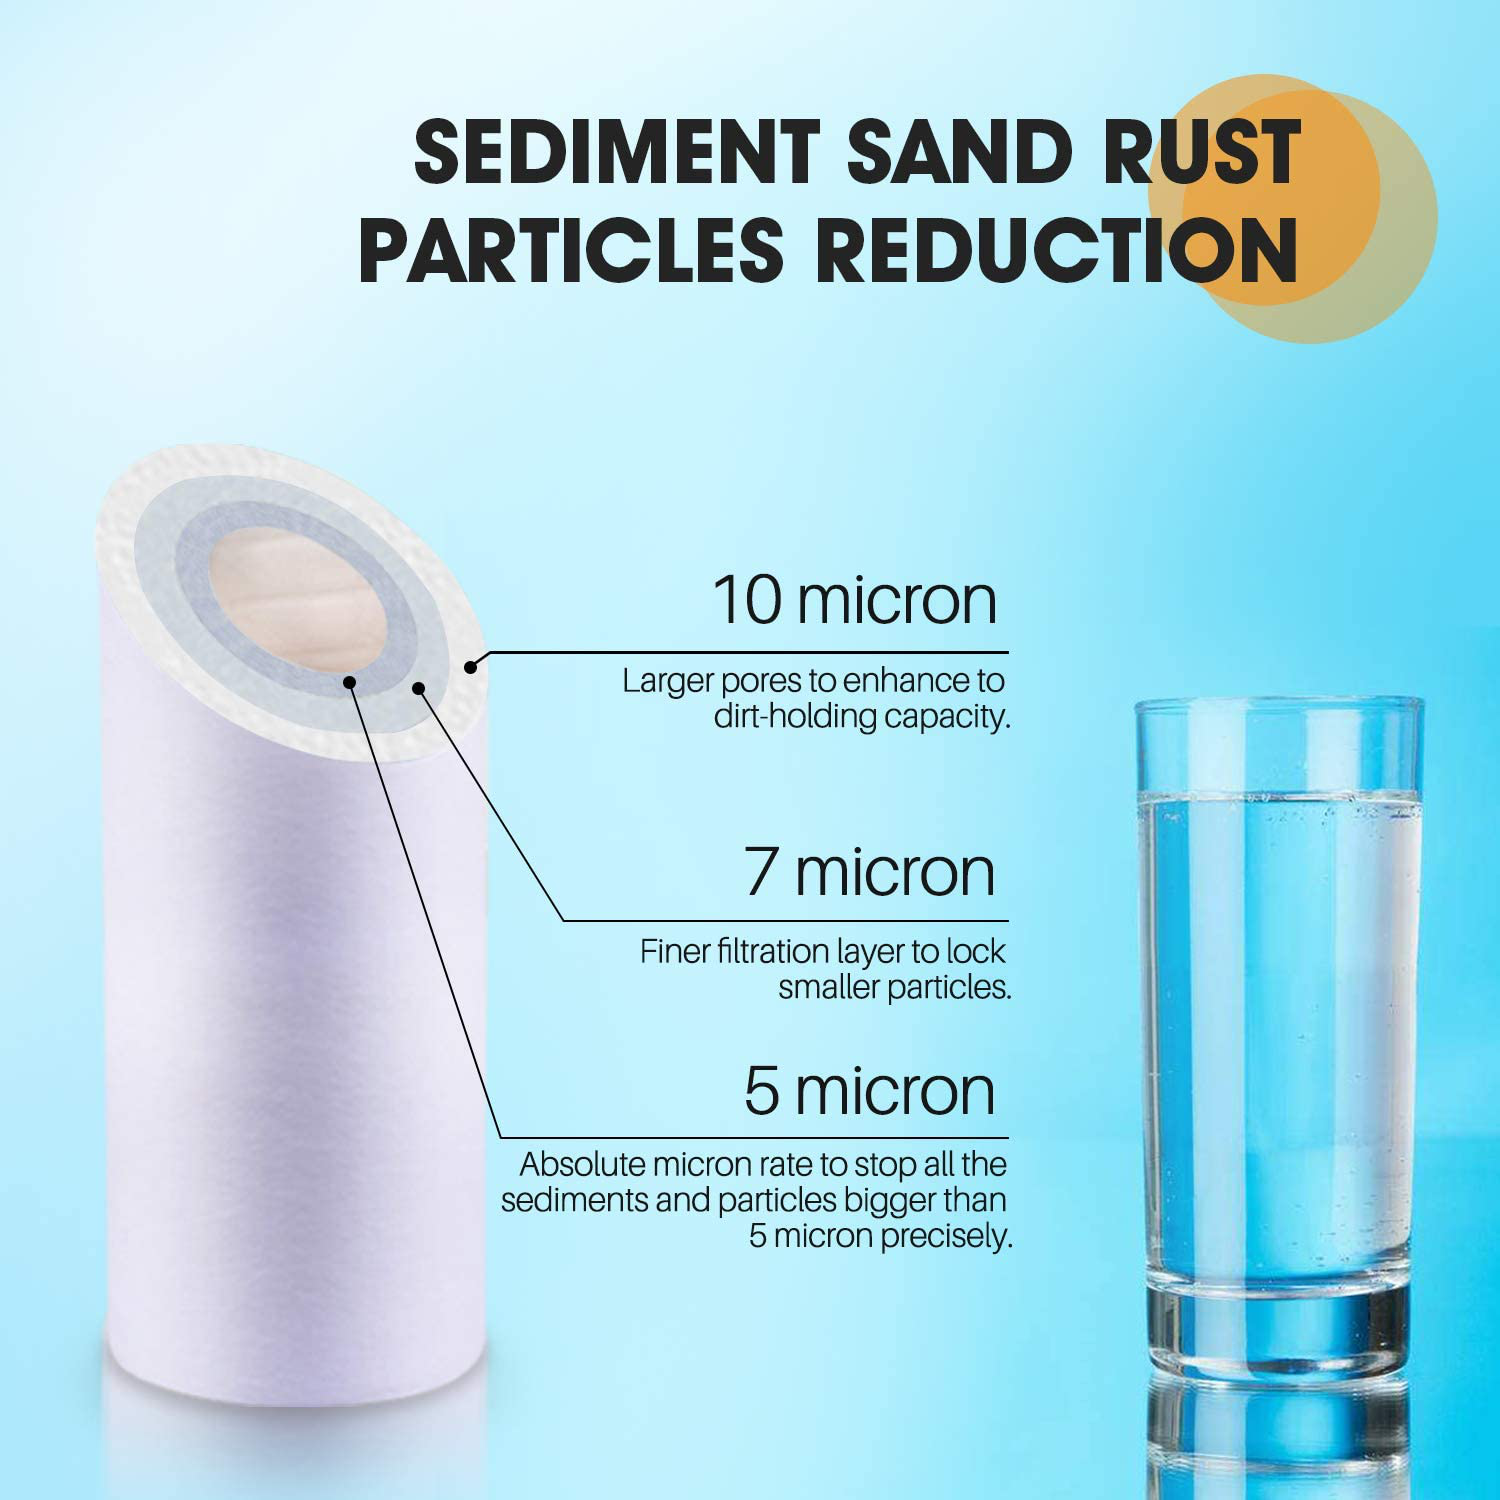 PUREPLUS 5 Micron 10" x 2.5" Whole House Sediment Home Water Filter Cartridge Replacement for Any 10 inch RO Unit, Culligan P5, Aqua-Pure AP110, Dupont WFPFC5002, CFS110, WHKF-GD05, PP10-05, 4Pack